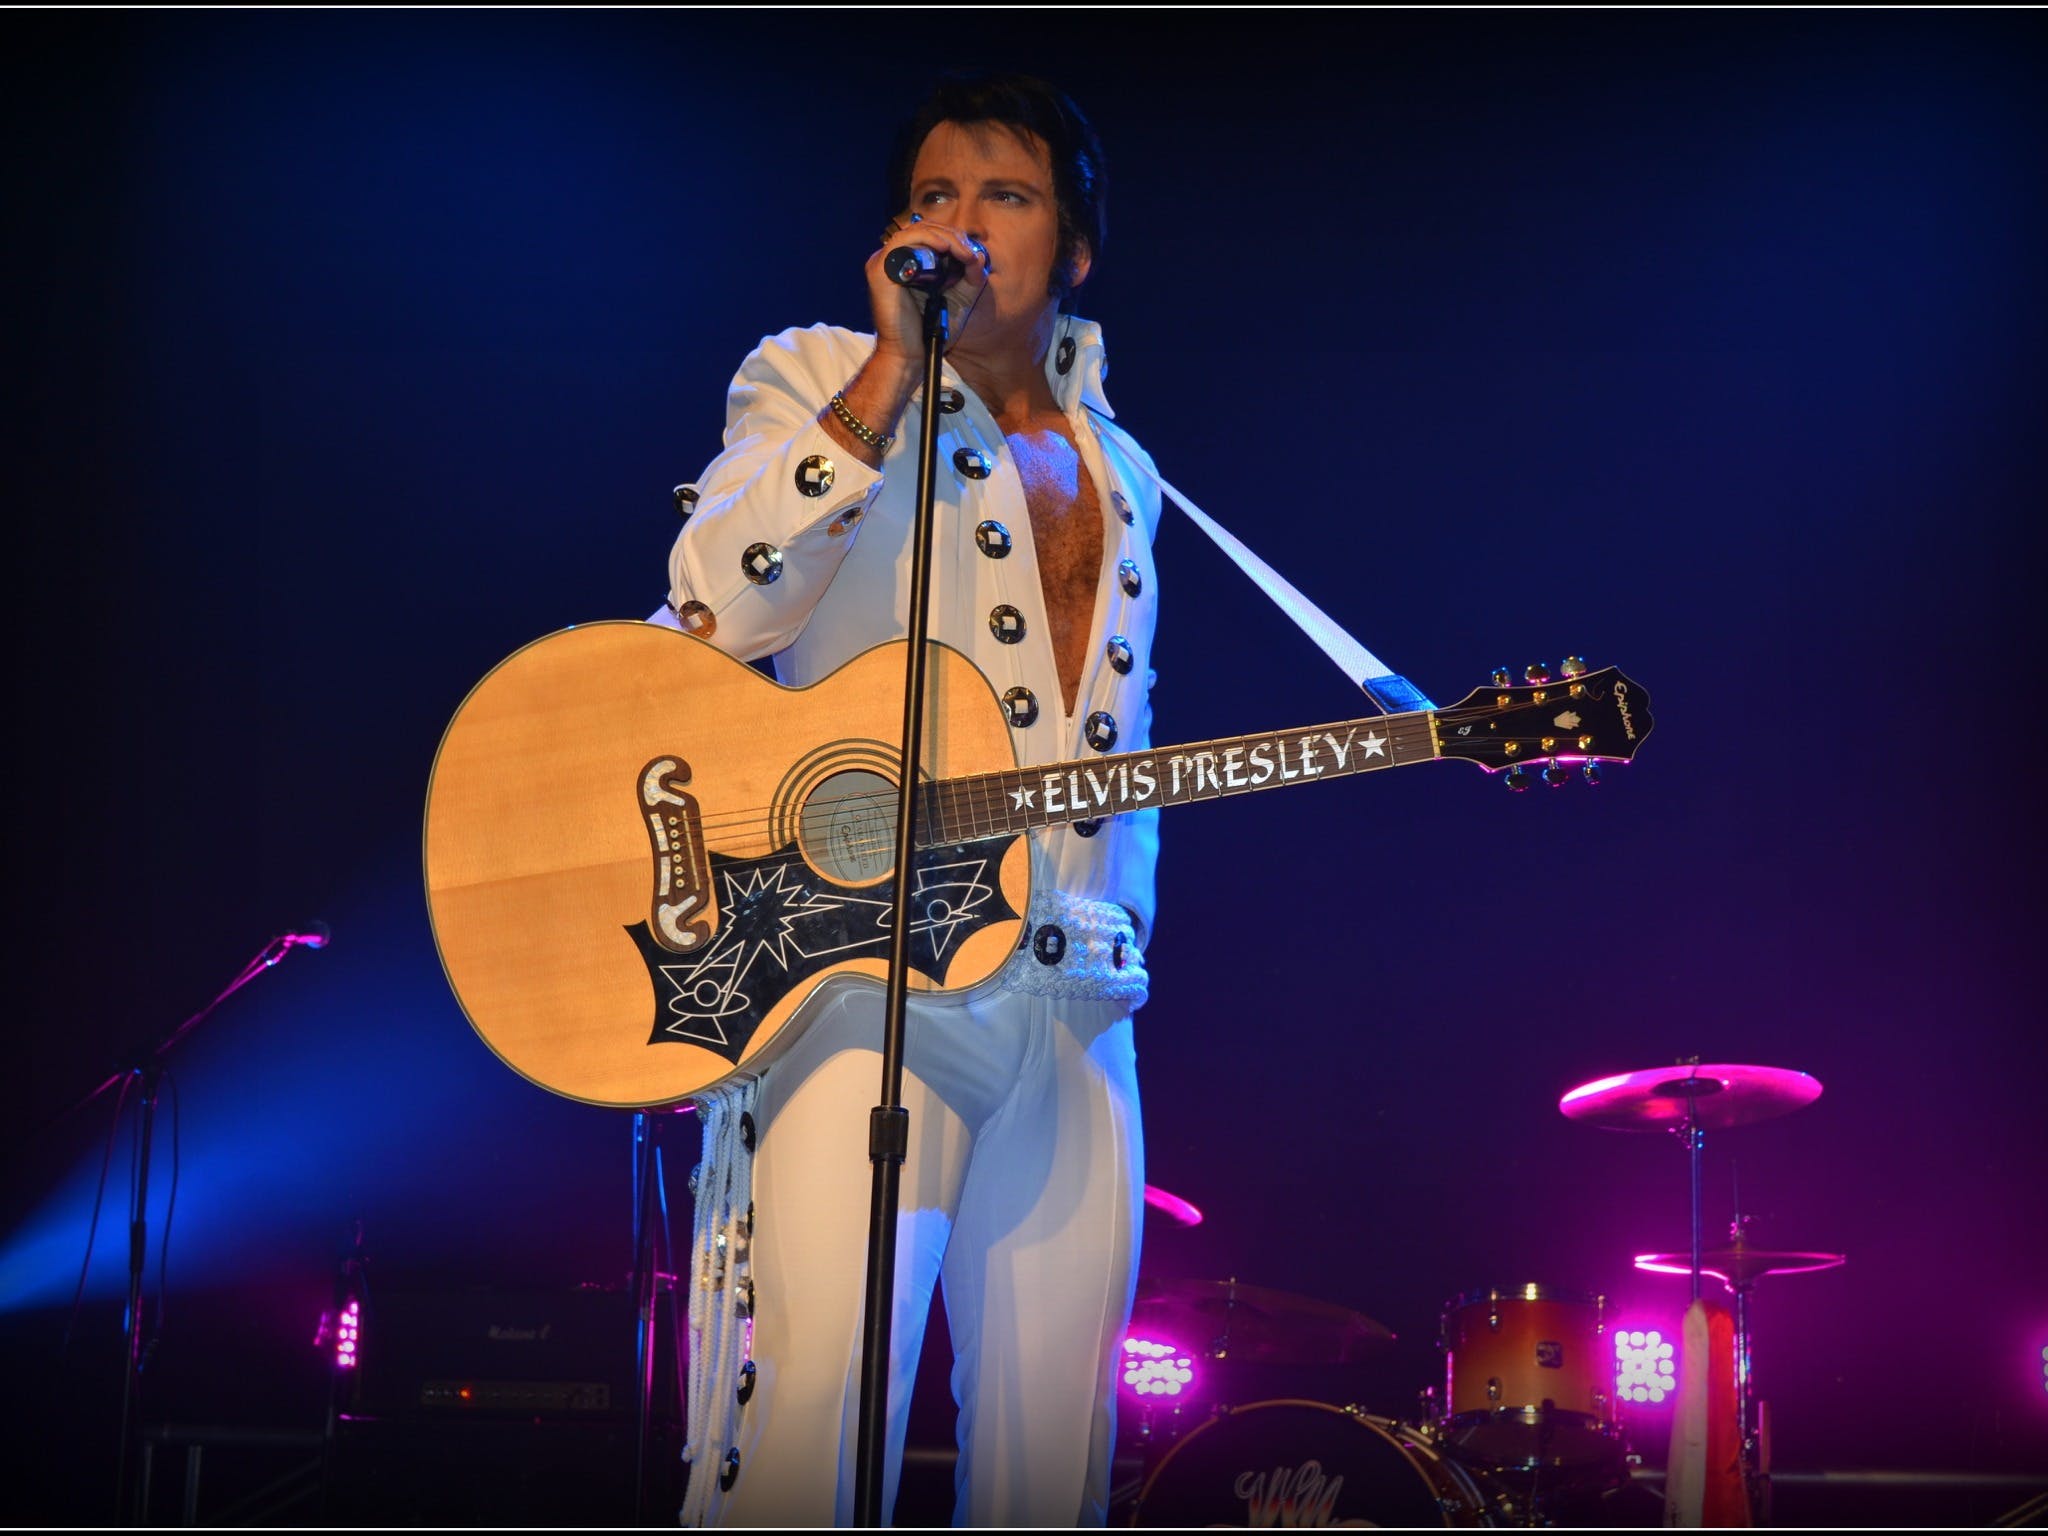 Elvis Forever - Damian Mullin 'Up Close and Personal' - Accommodation Kalgoorlie